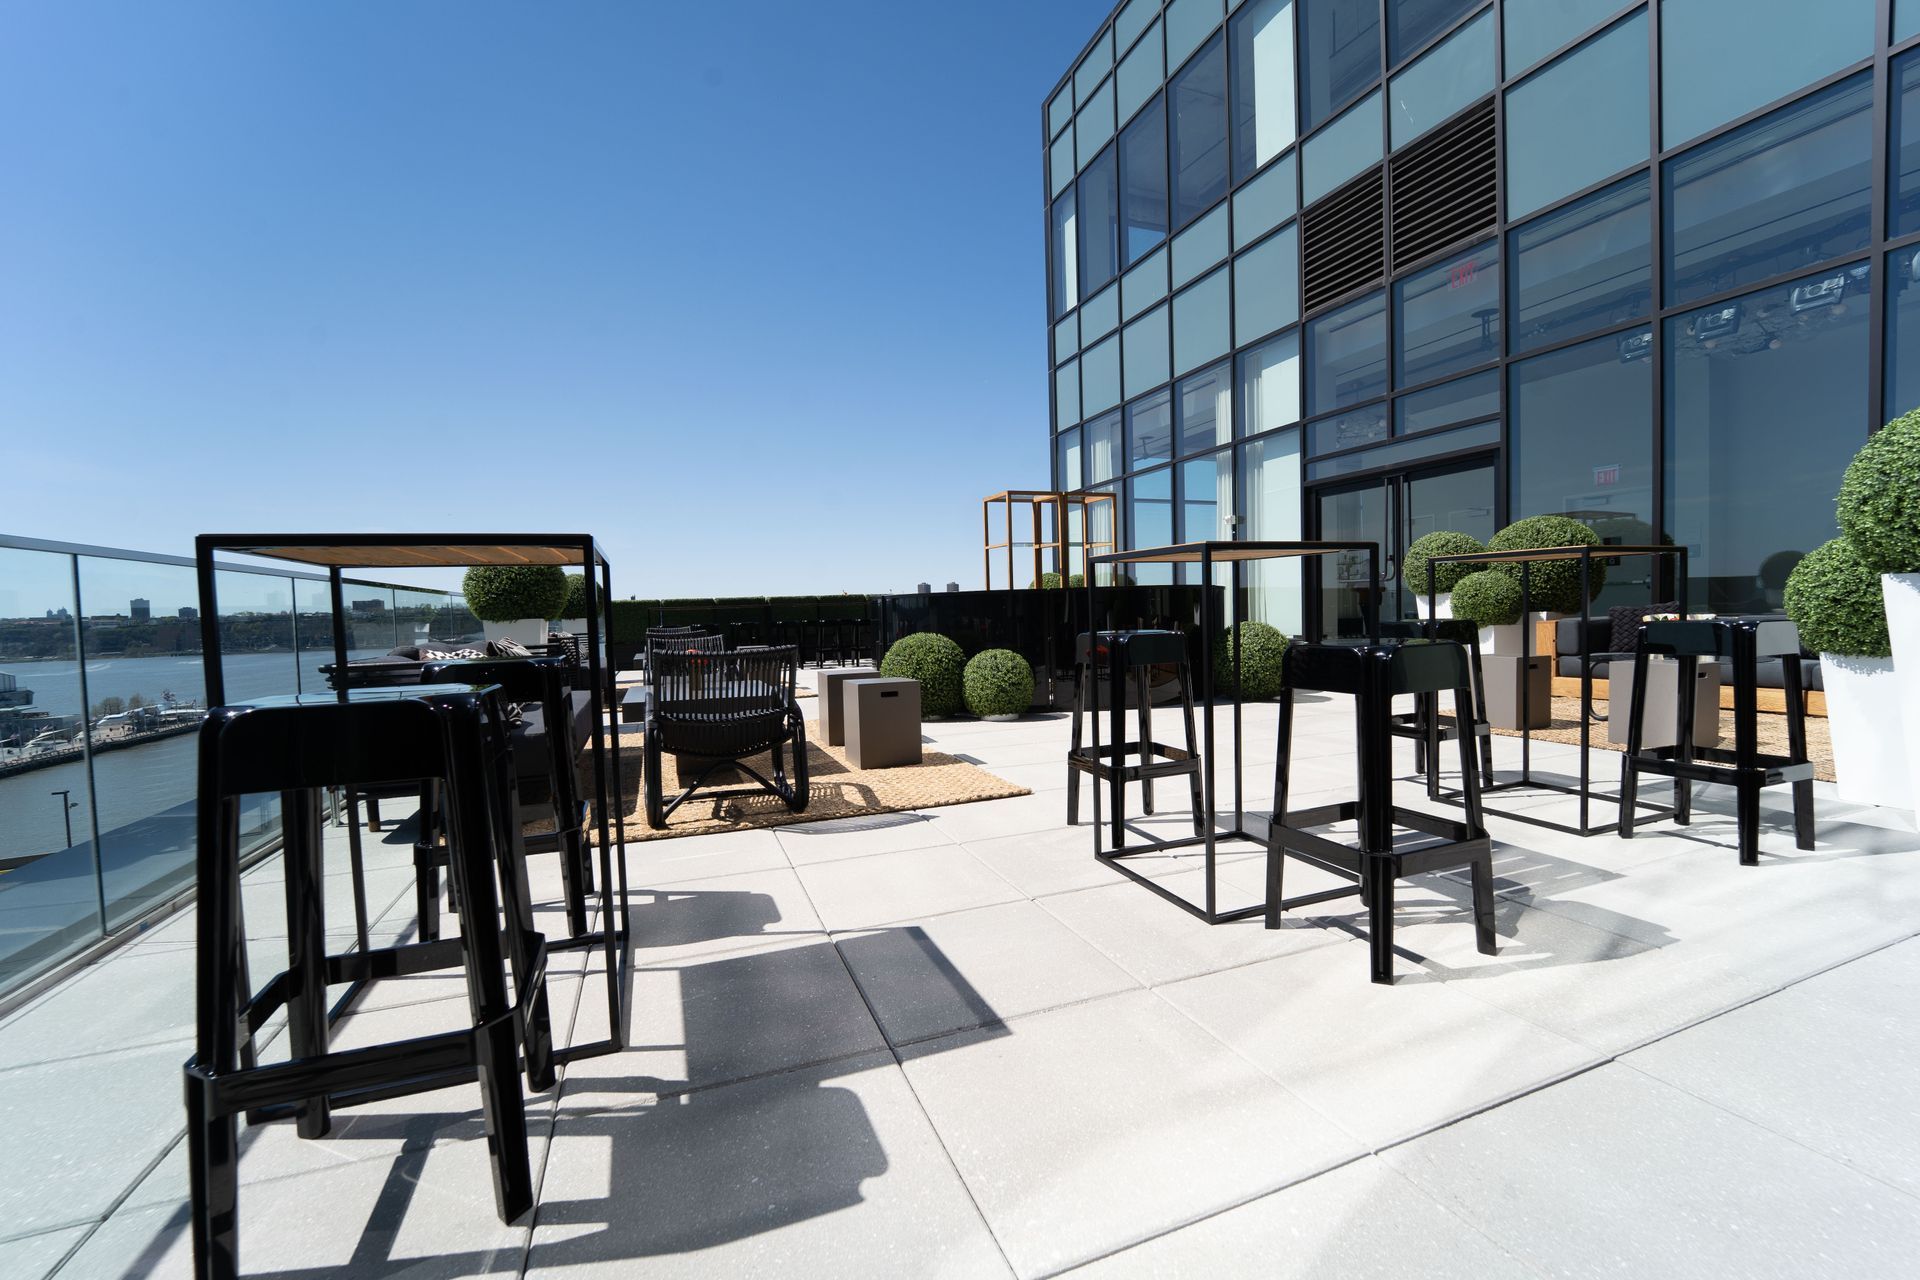 A patio with tables and chairs in front of a building.